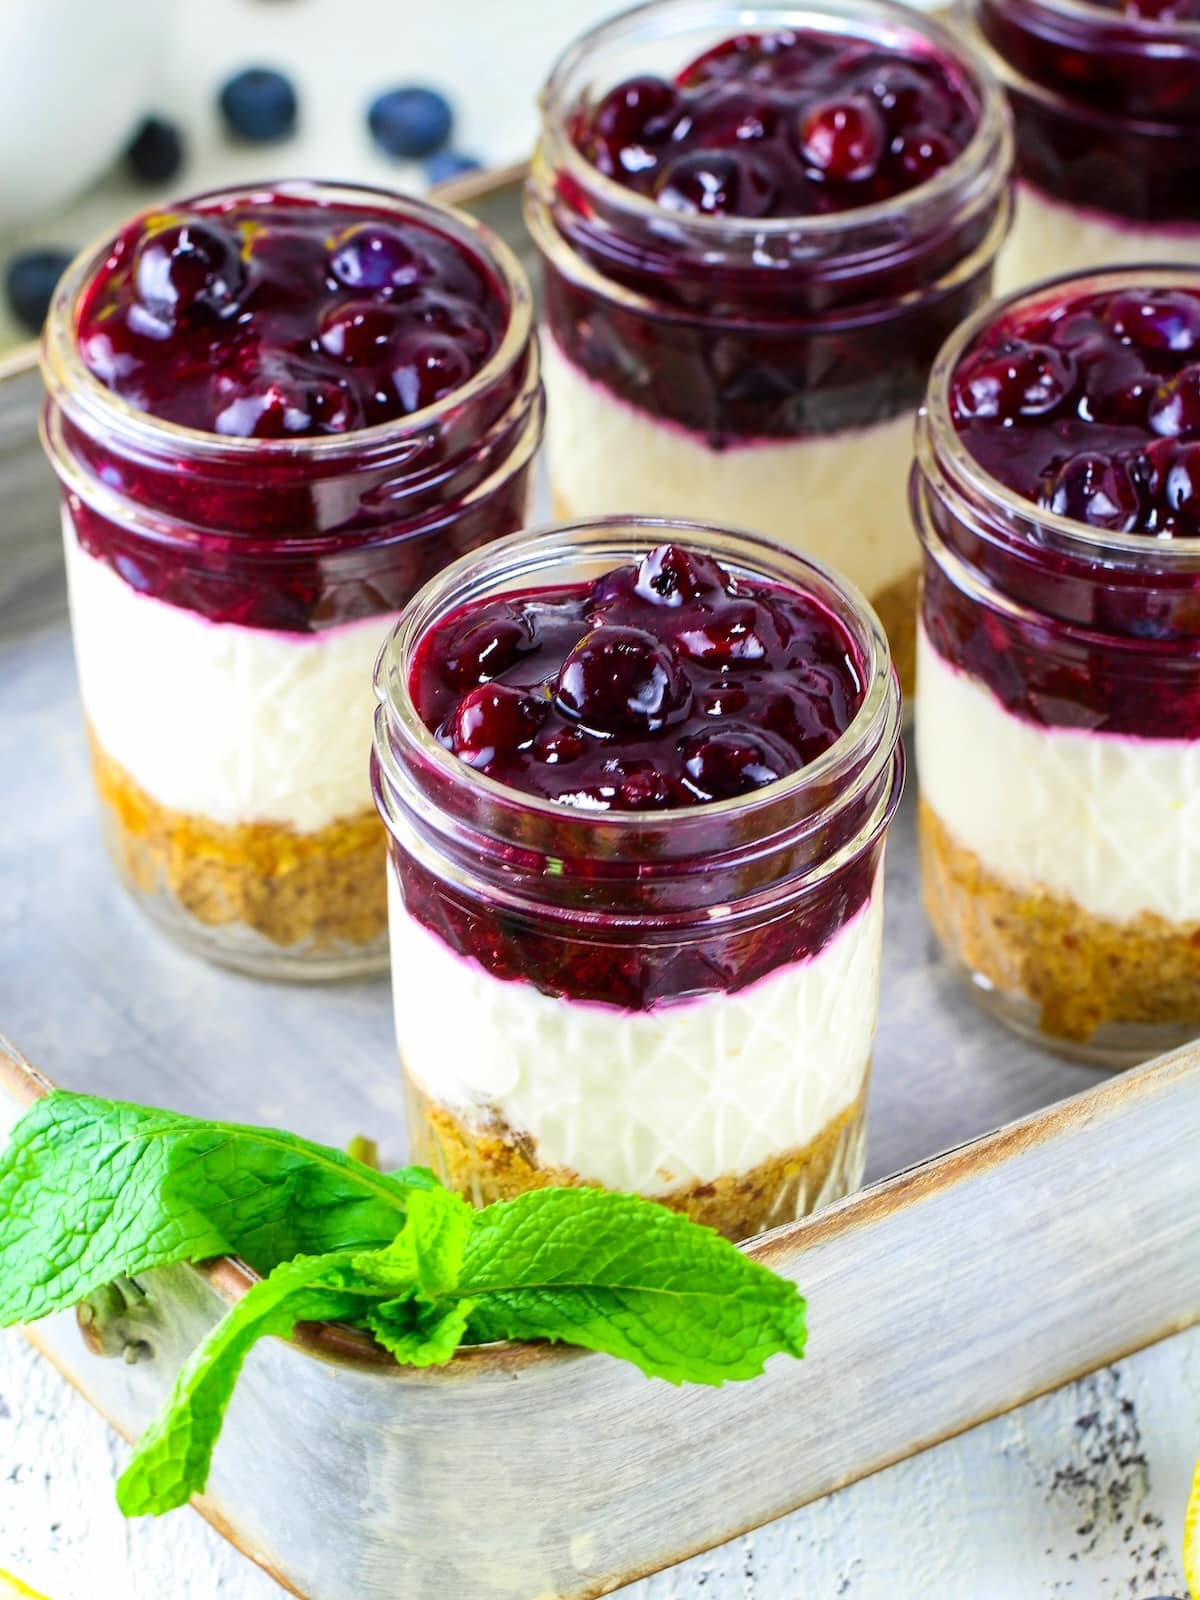 Individual Blueberry Lemon No Bake Cheesecake Jars - the perfect dessert for grilling and chilling!